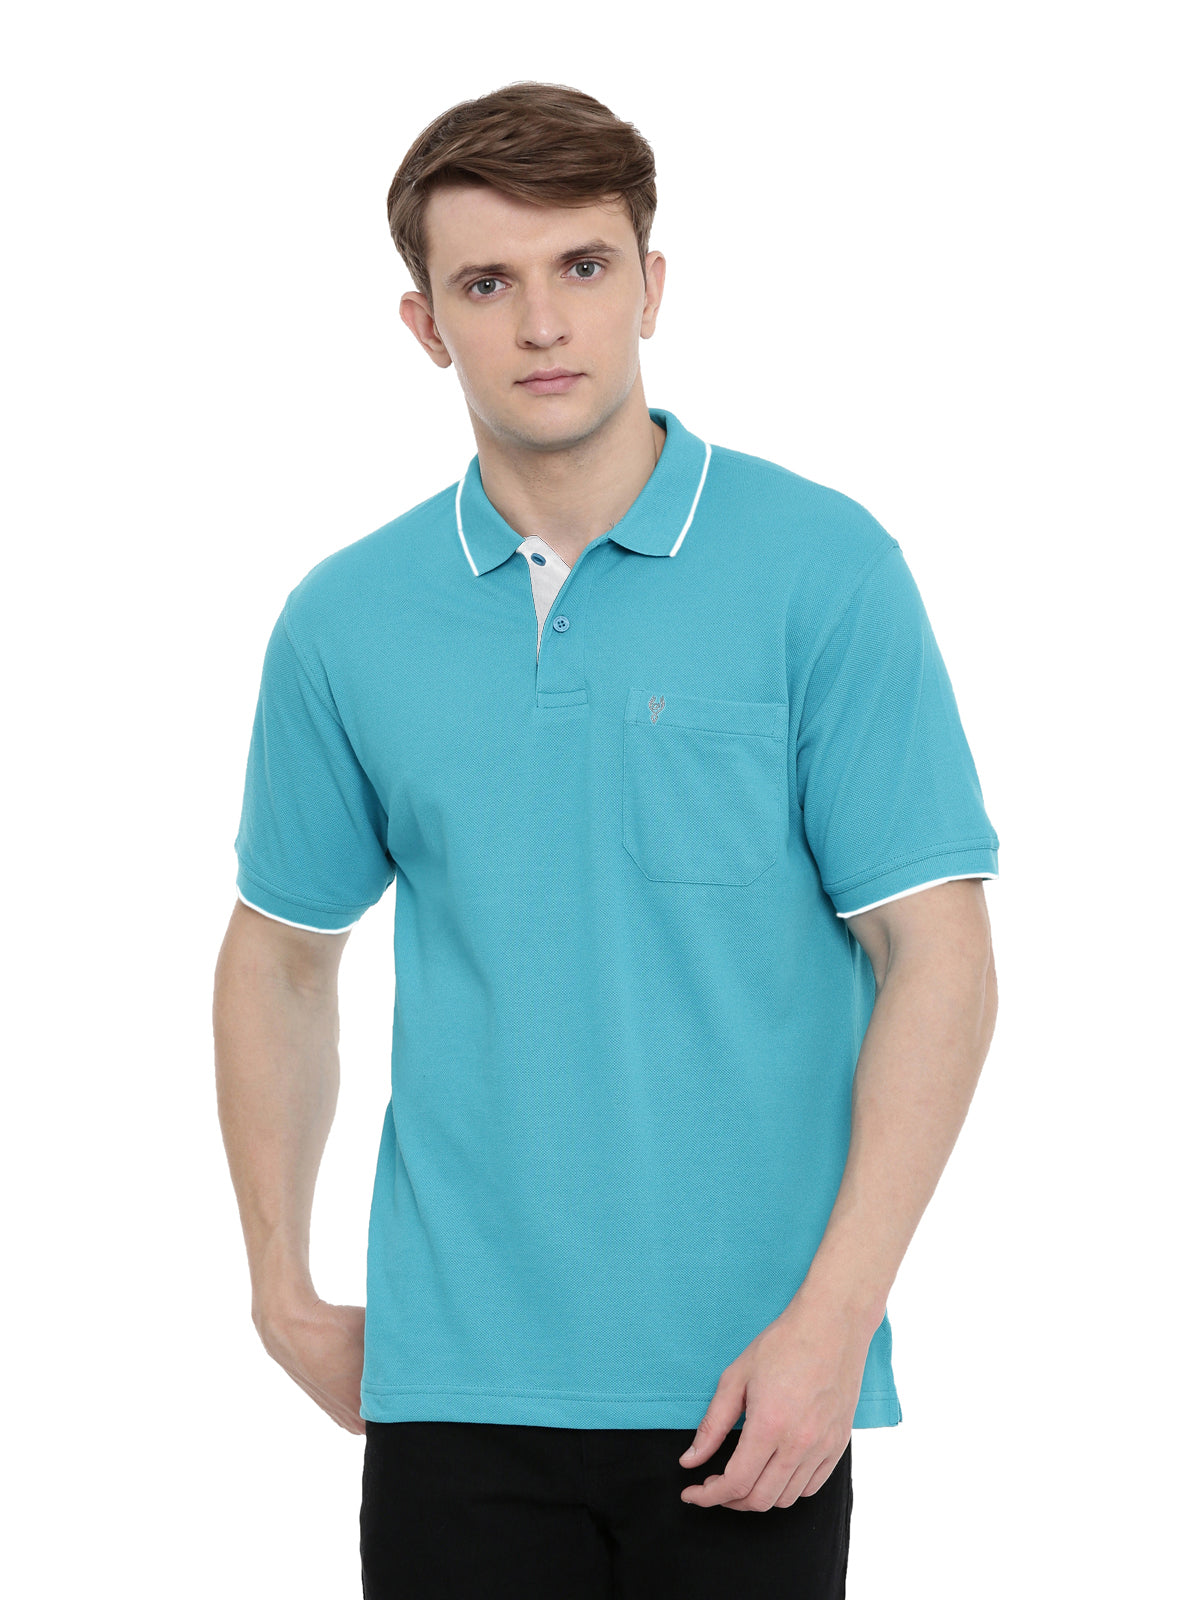 Classic Polo Men's Diva Blue Authentic Fit Polo T-Shirt | 4SSN 209